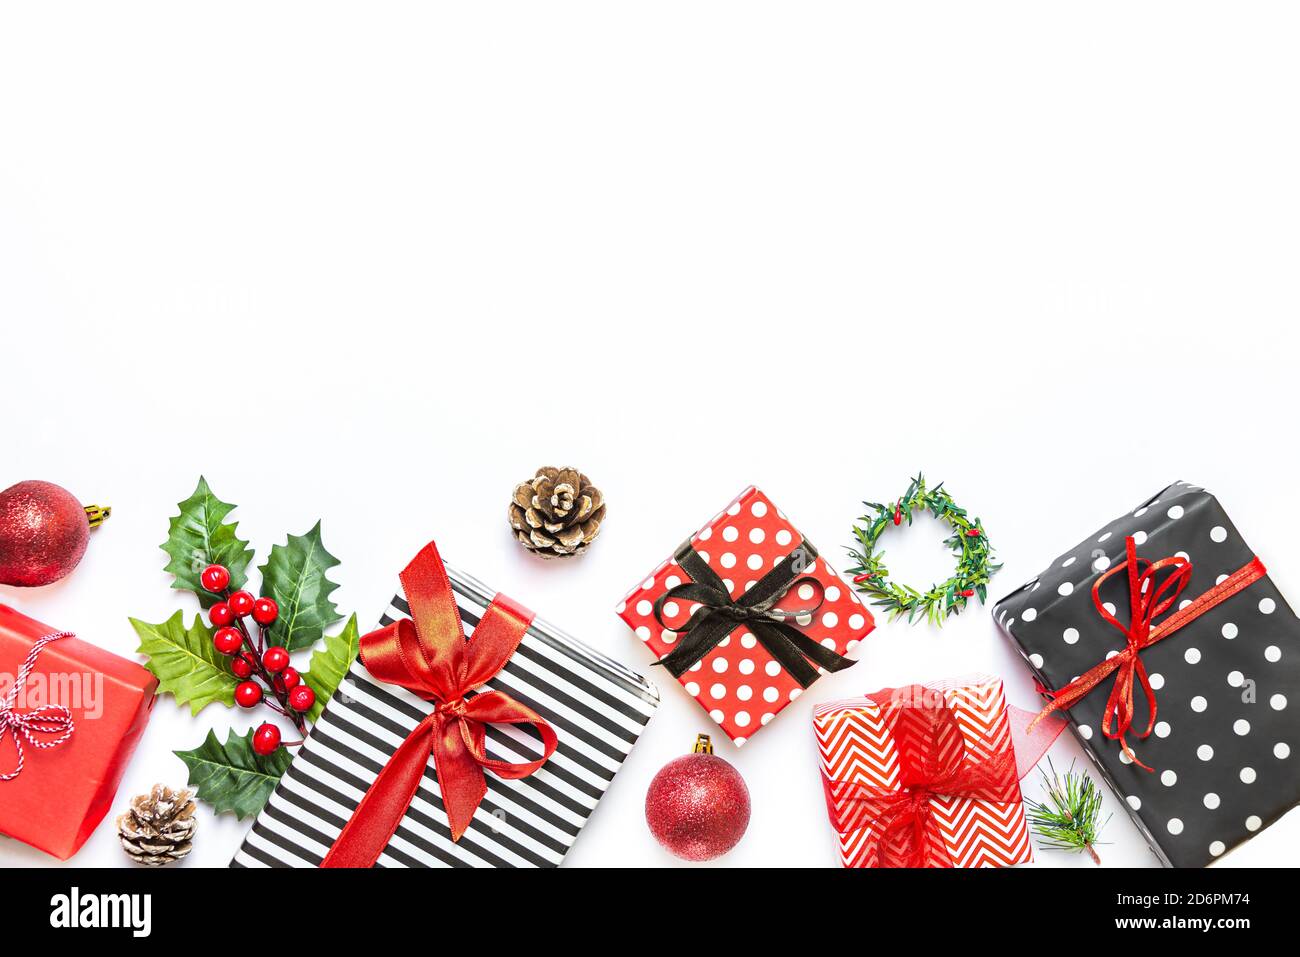 Gift boxes wrapped in striped and dotted black and white and red paper over white background. Christmas presents and ornament preparation. Copy space. Stock Photo